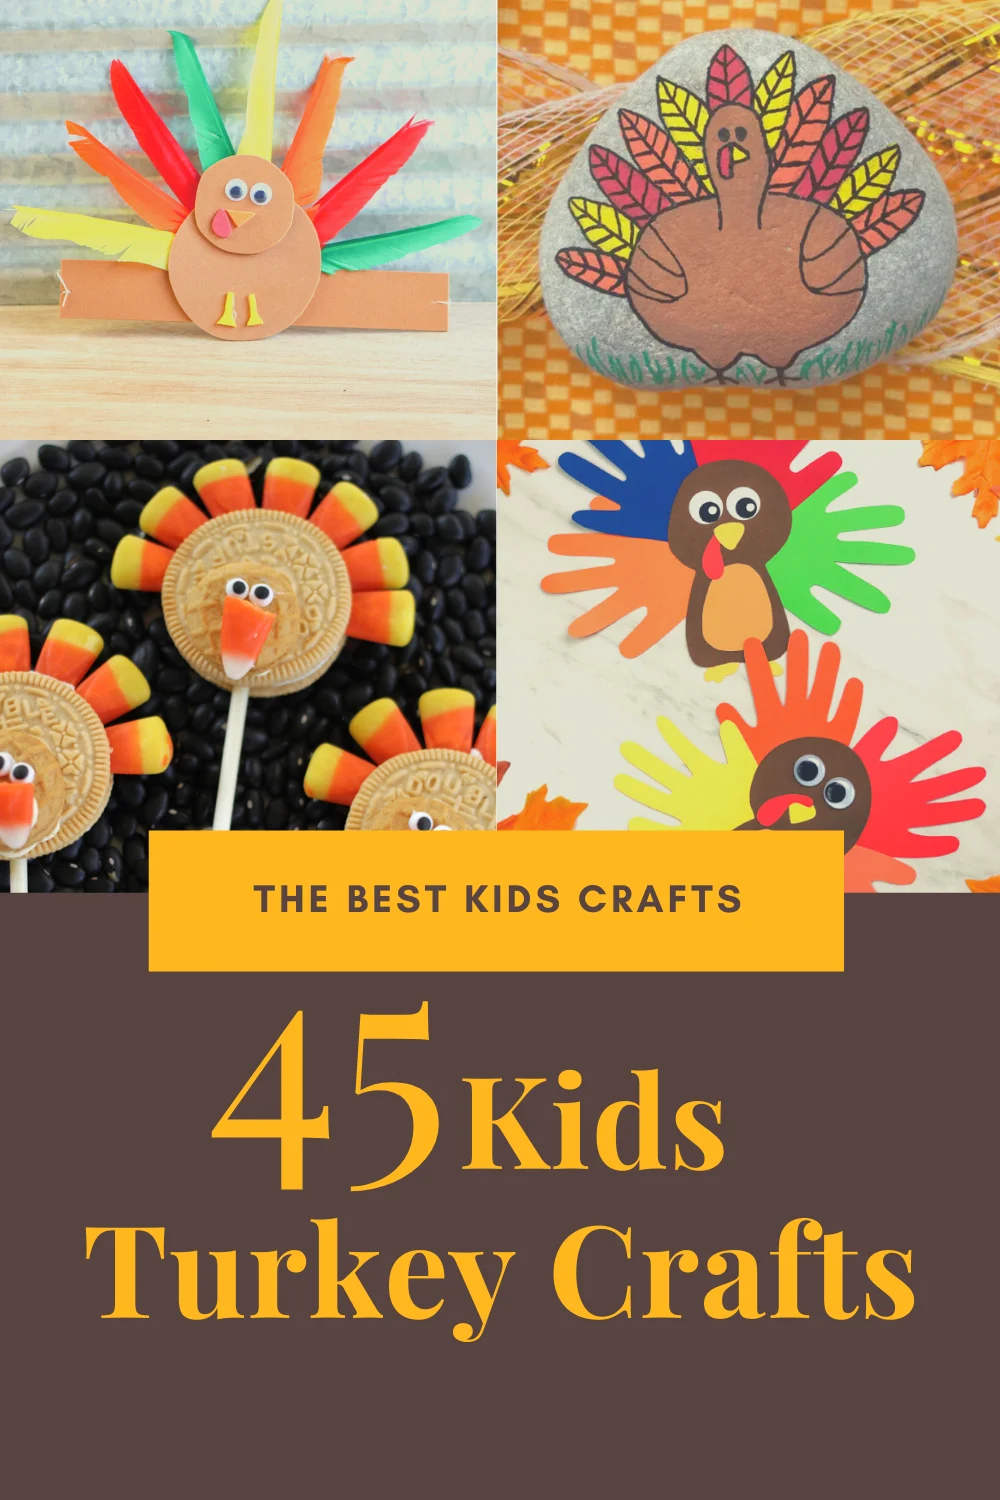 5 Fun and Easy Rock Painting Ideas to do this Thanksgiving Break